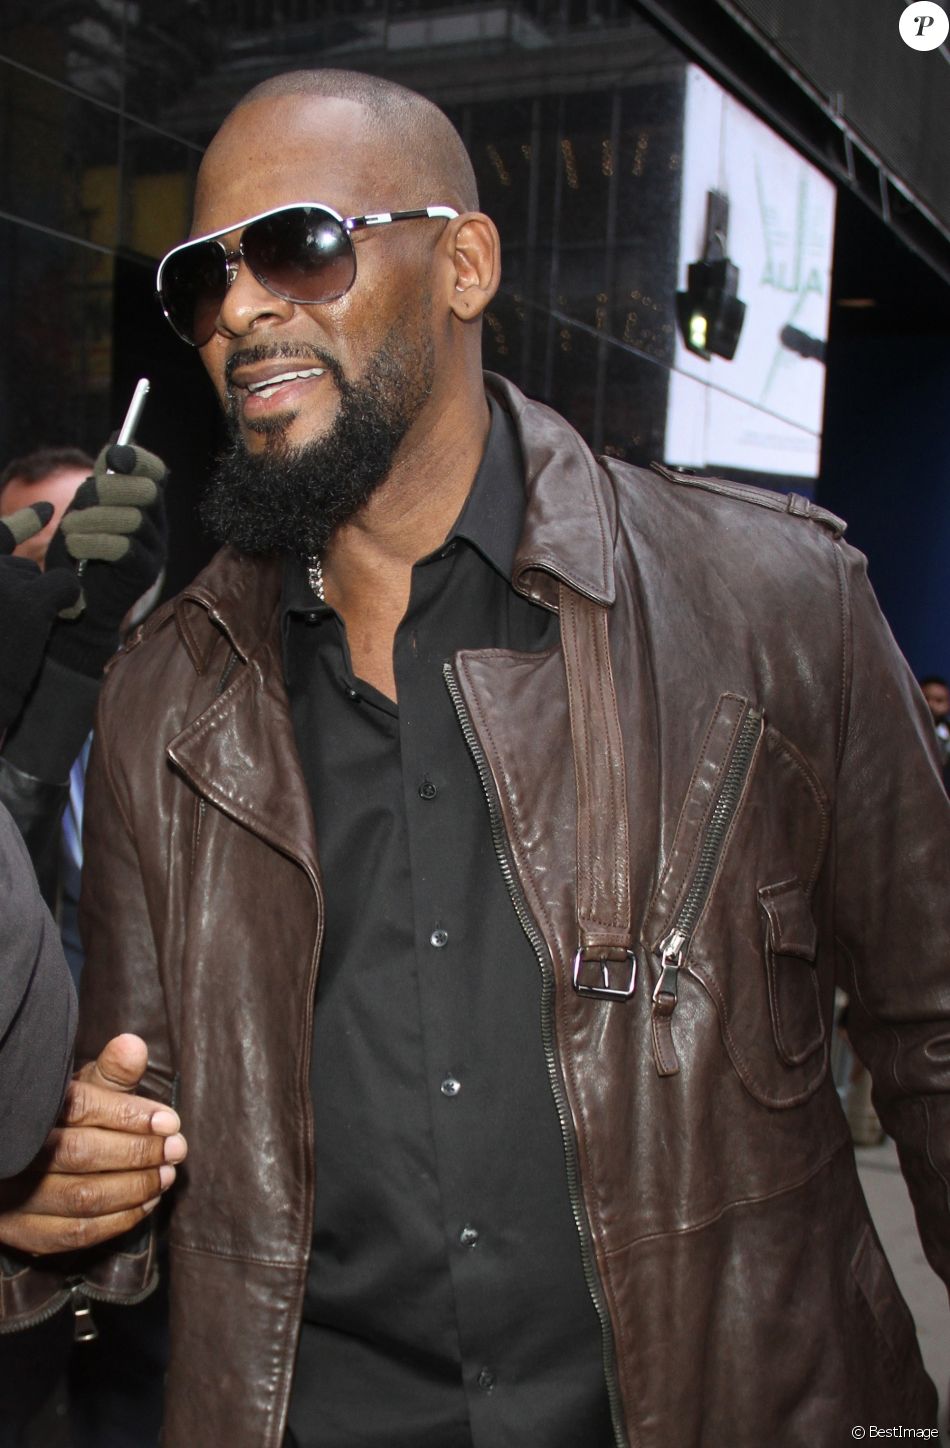 Archives - Le rappeur R. Kelly (Robert Sylvester Kelly), accusé d&#039;agressions sexuelles est lâché par Sony Music R. Kelly has been dropped from his Sony Music contract.